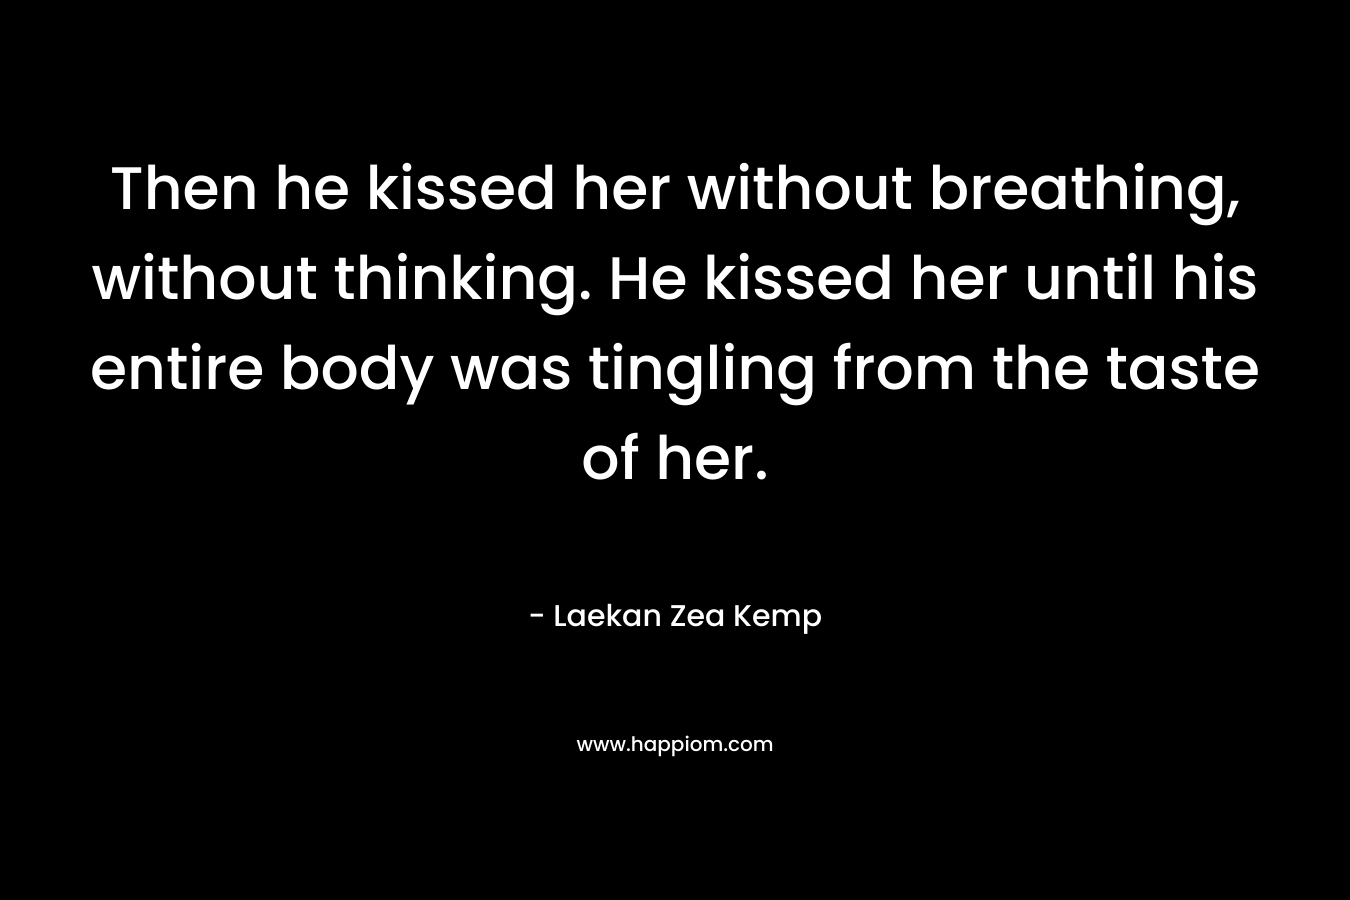 Then he kissed her without breathing, without thinking. He kissed her until his entire body was tingling from the taste of her. – Laekan Zea Kemp